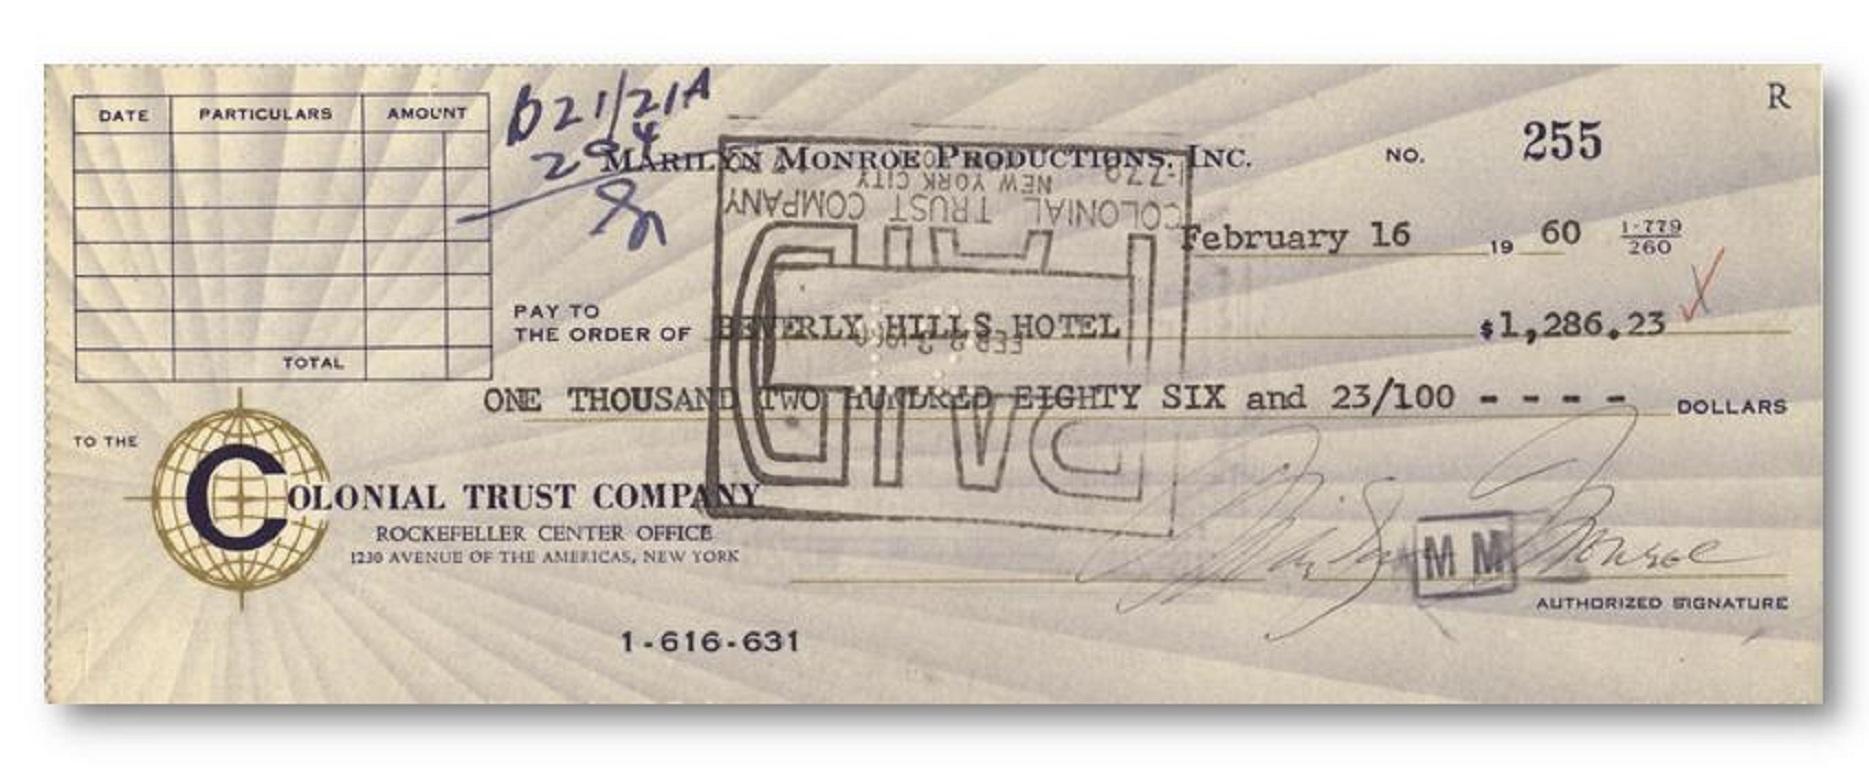 A bank cheque signed by Marilyn Monroe
Paid to the Beverly Hills Hotel in February 1960, where she had her famous affair with co-star Yves Montand
Marilyn Monroe (1926-1962) needs little introduction. An actress, model and entertainer, she is